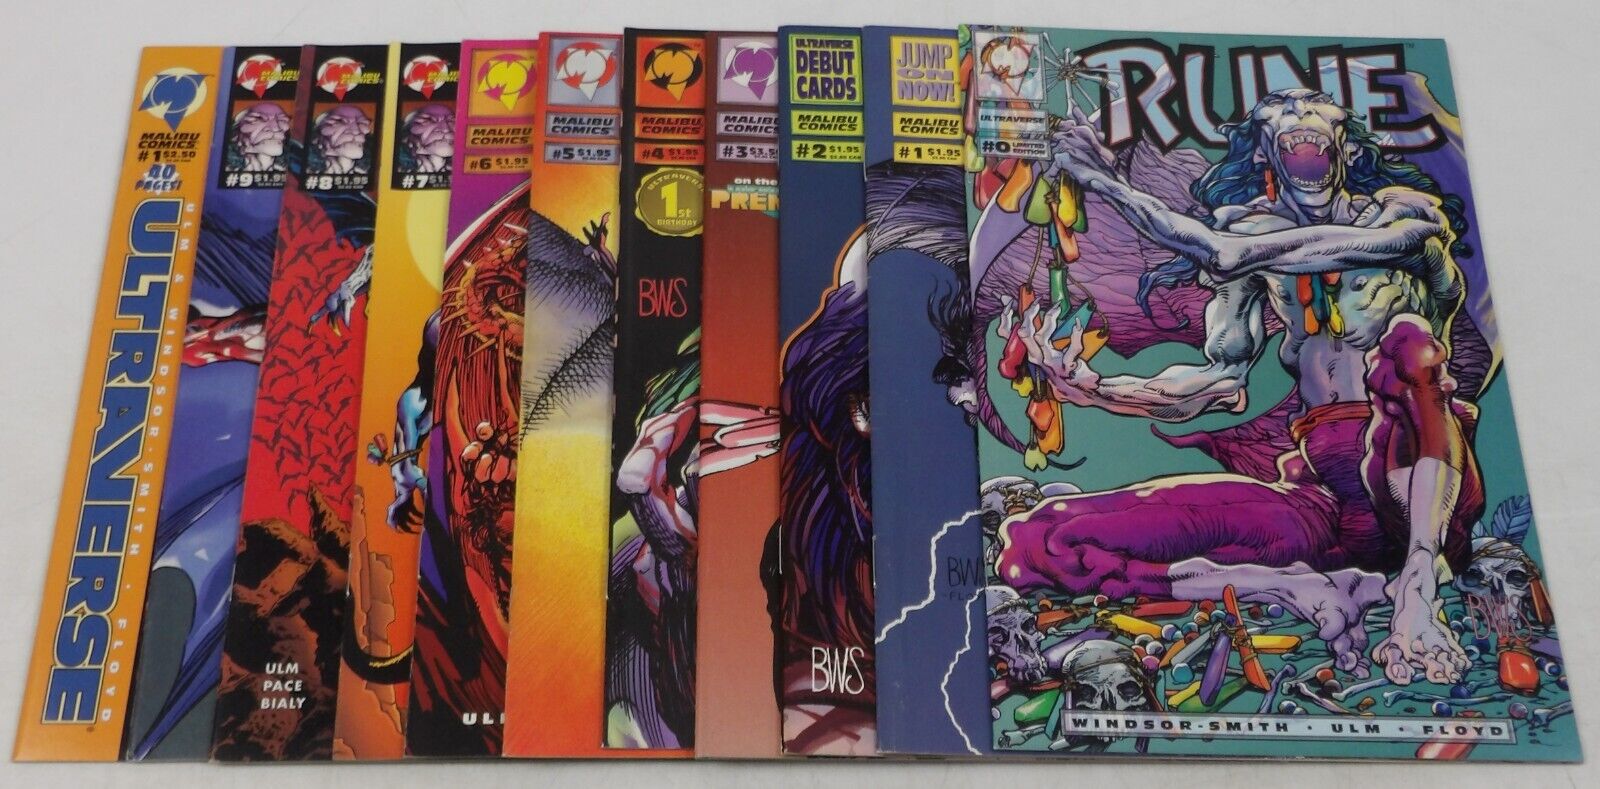 Rune #0 & 1-9 VF/NM complete series + Giant-Size Barry Windsor-Smith Ultraverse